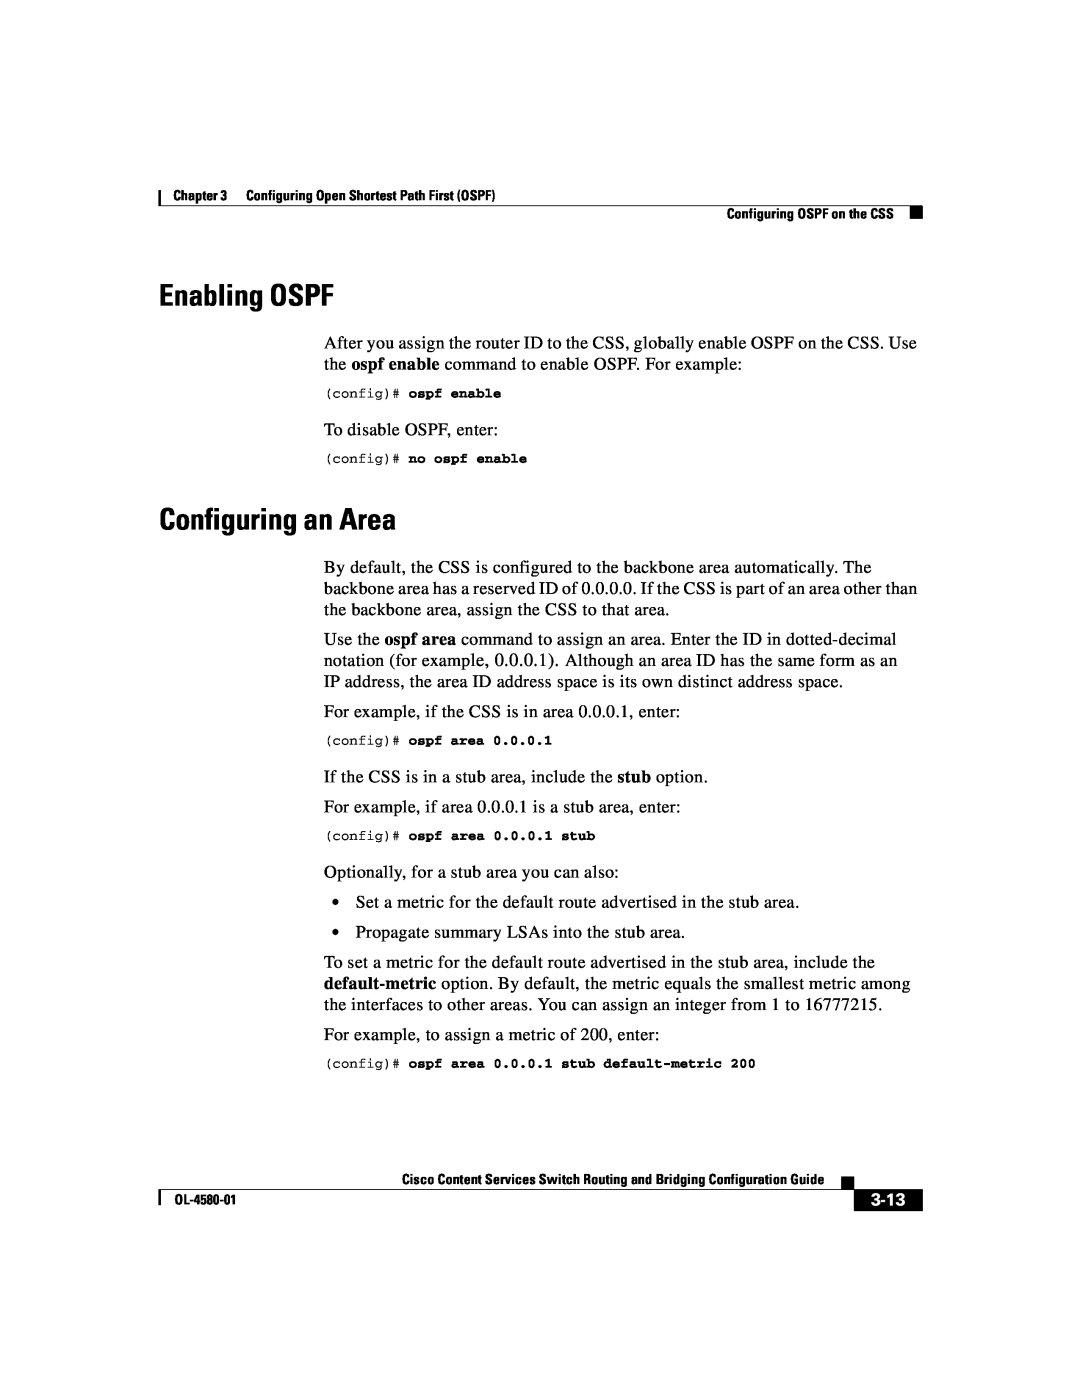 Cisco Systems OL-4580-01 manual Enabling OSPF, Configuring an Area, 3-13 